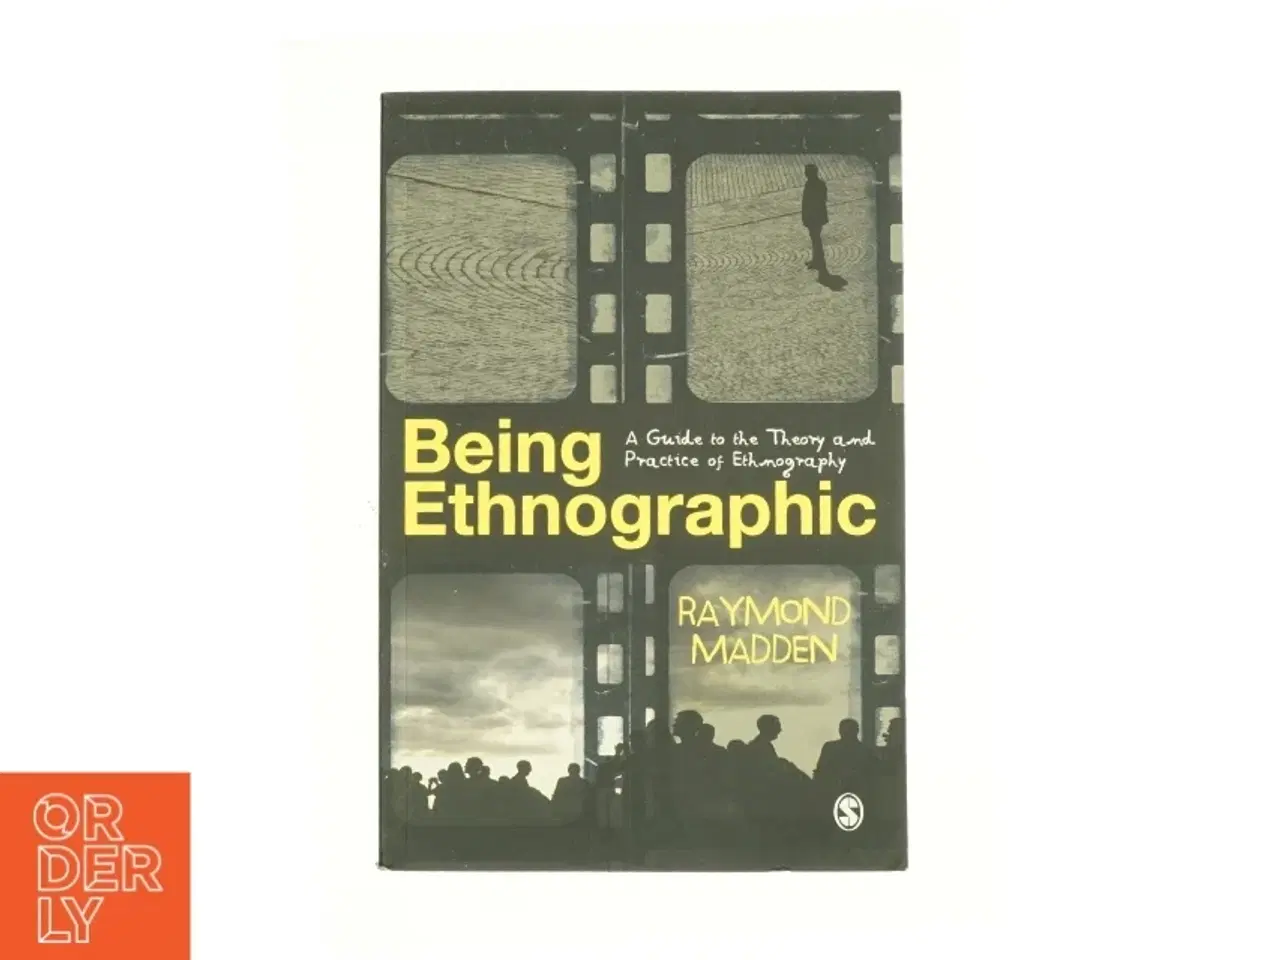 Billede 1 - Being Ethnographic: a Guide to the Theory and Practice of Ethnography - 1st Edition (eBook) af Raymond Madden (Bog)